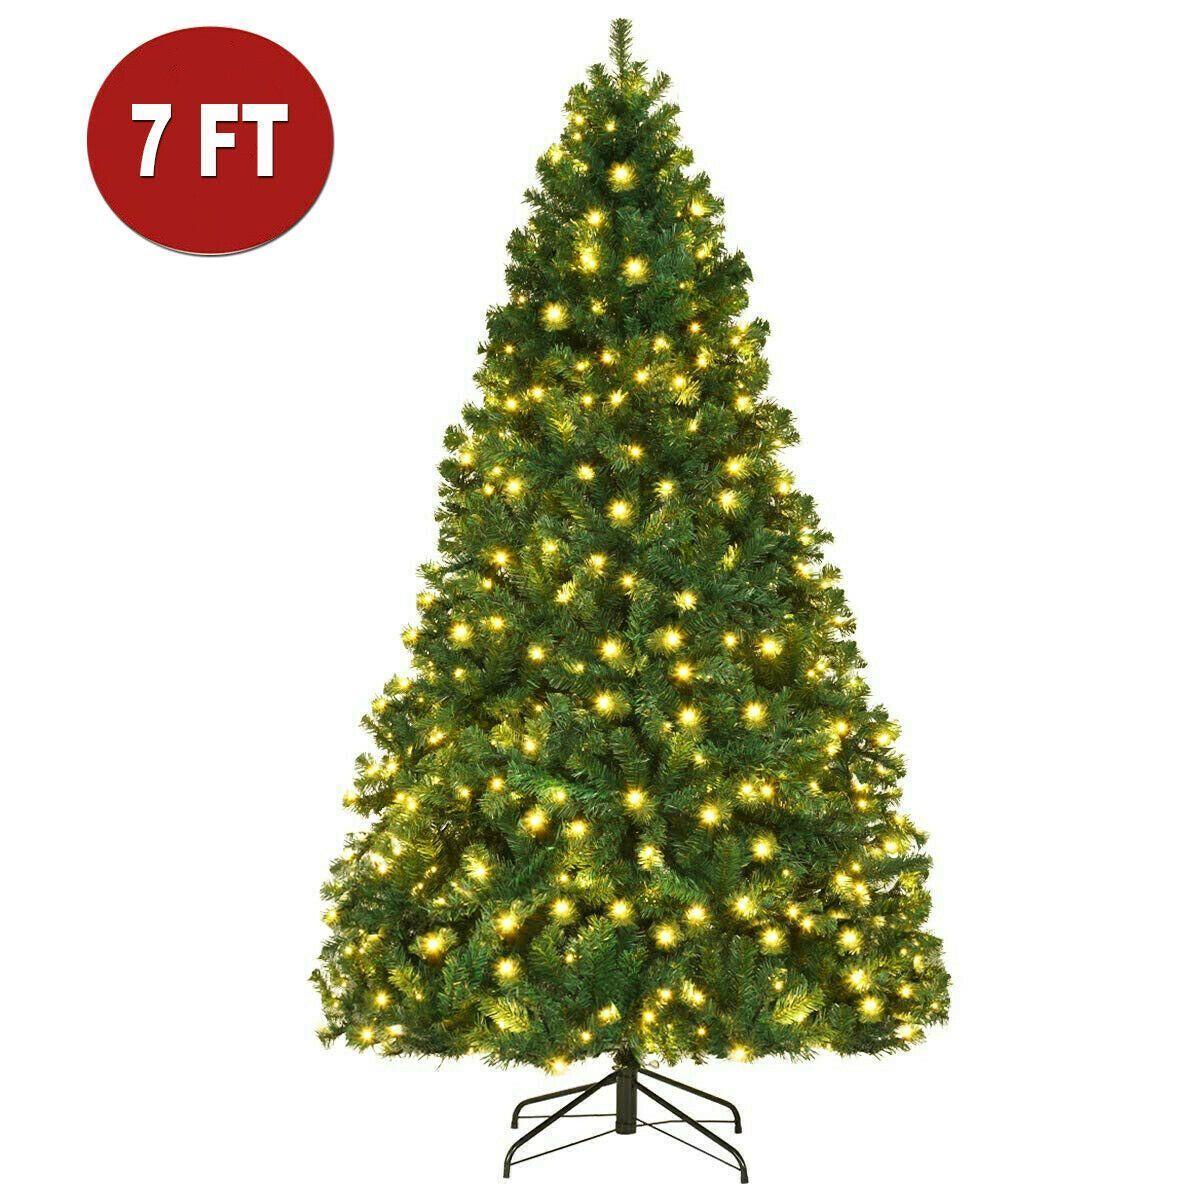 7 FT + LED LIGHTS-Christmas Trees with Led Lights Decoration for Christmas Parties